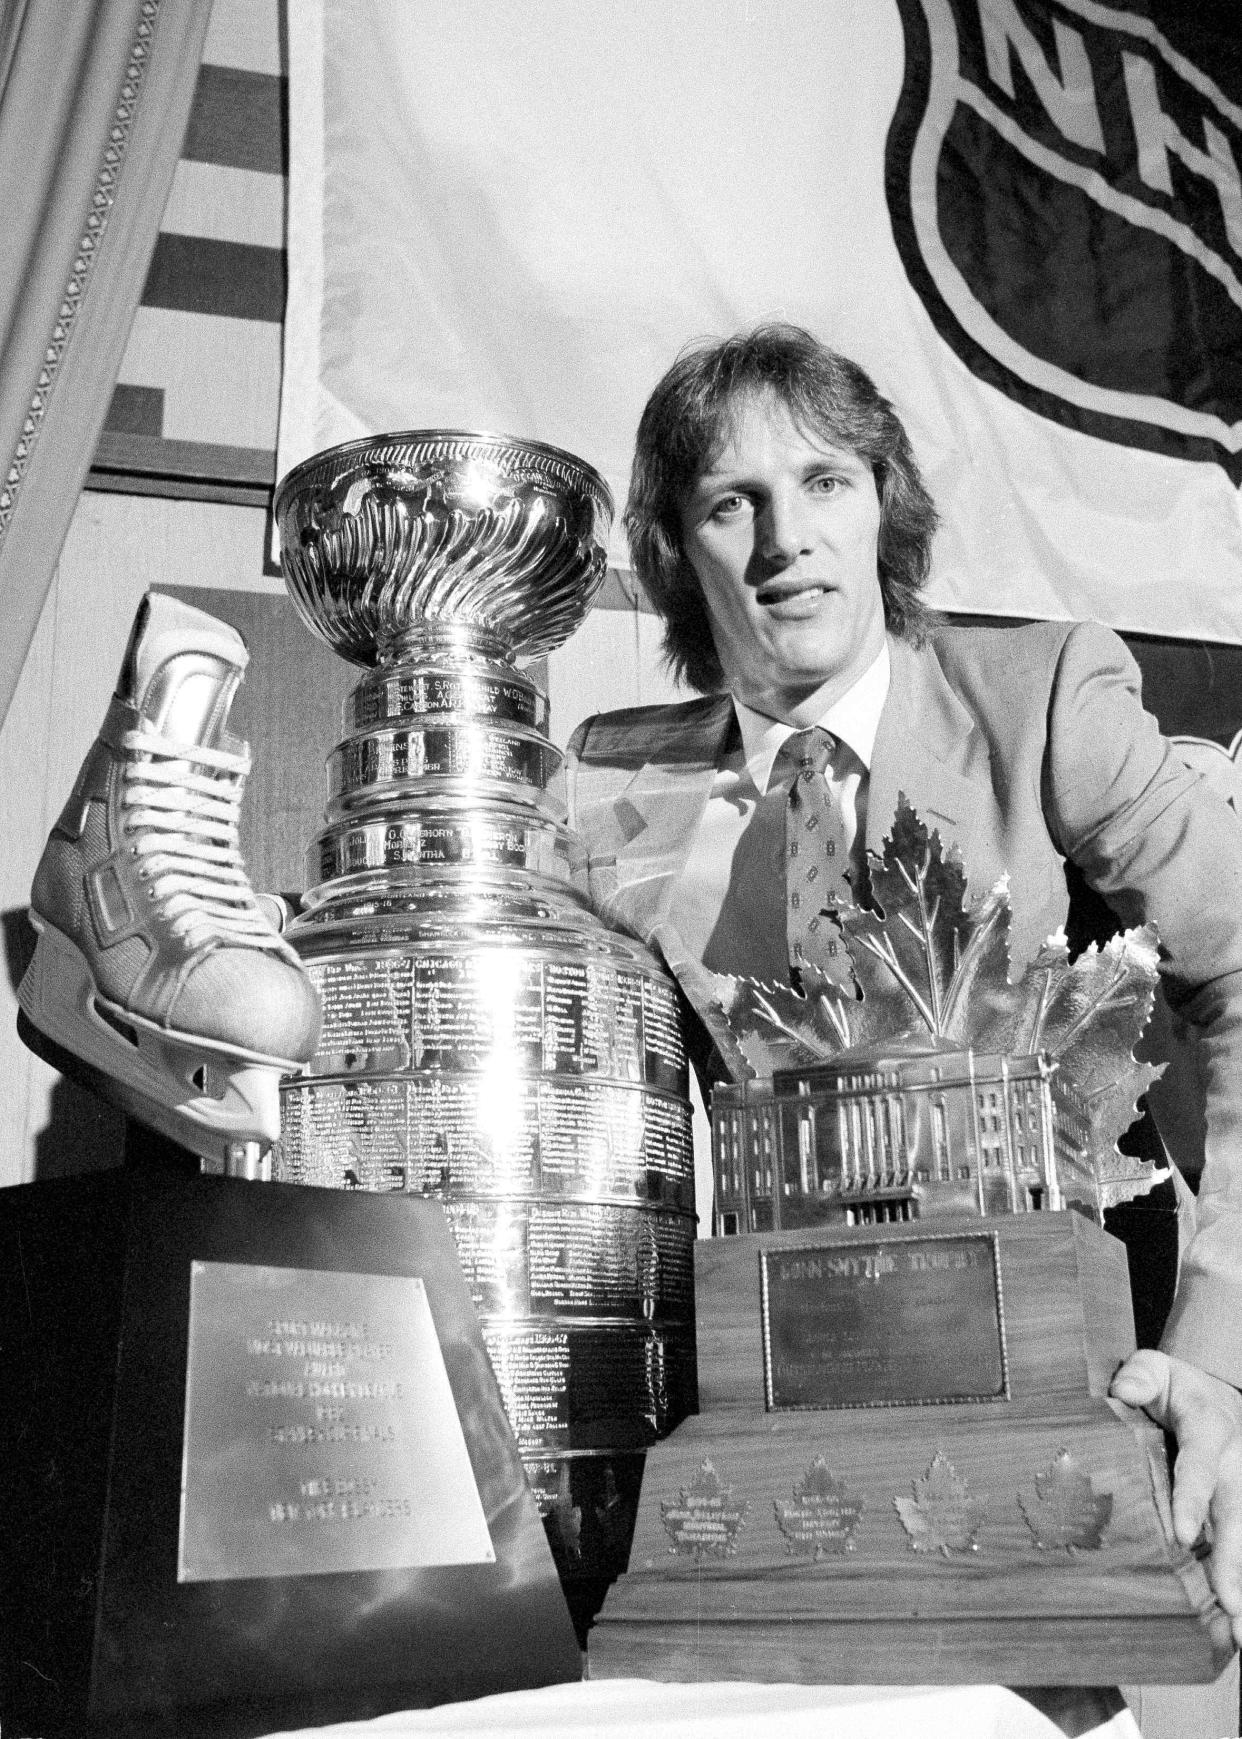 FILE - New York Islanders right wing Mike Bossy poses in New York with some of the spoils reaped after the Islanders defeated the Vancouver Canucks to win the Stanley Cup at the Nassau Coliseum in Uniondale, N.Y., May 20, 1982. Bossy scored two goals in the game and finished the playoffs with 17, earning the Conn Smythe MVP trophy at right and the Sport Magazine MVP trophy, left, At center is the Stanley Cup. Bossy, one of hockey’s most prolific goal-scorers and a star for the New York Islanders during their 1980s dynasty, died Thursday, April 14, 2022, after a battle with lung cancer. He was 65. (AP Photo/Marty Lederhandler, File)